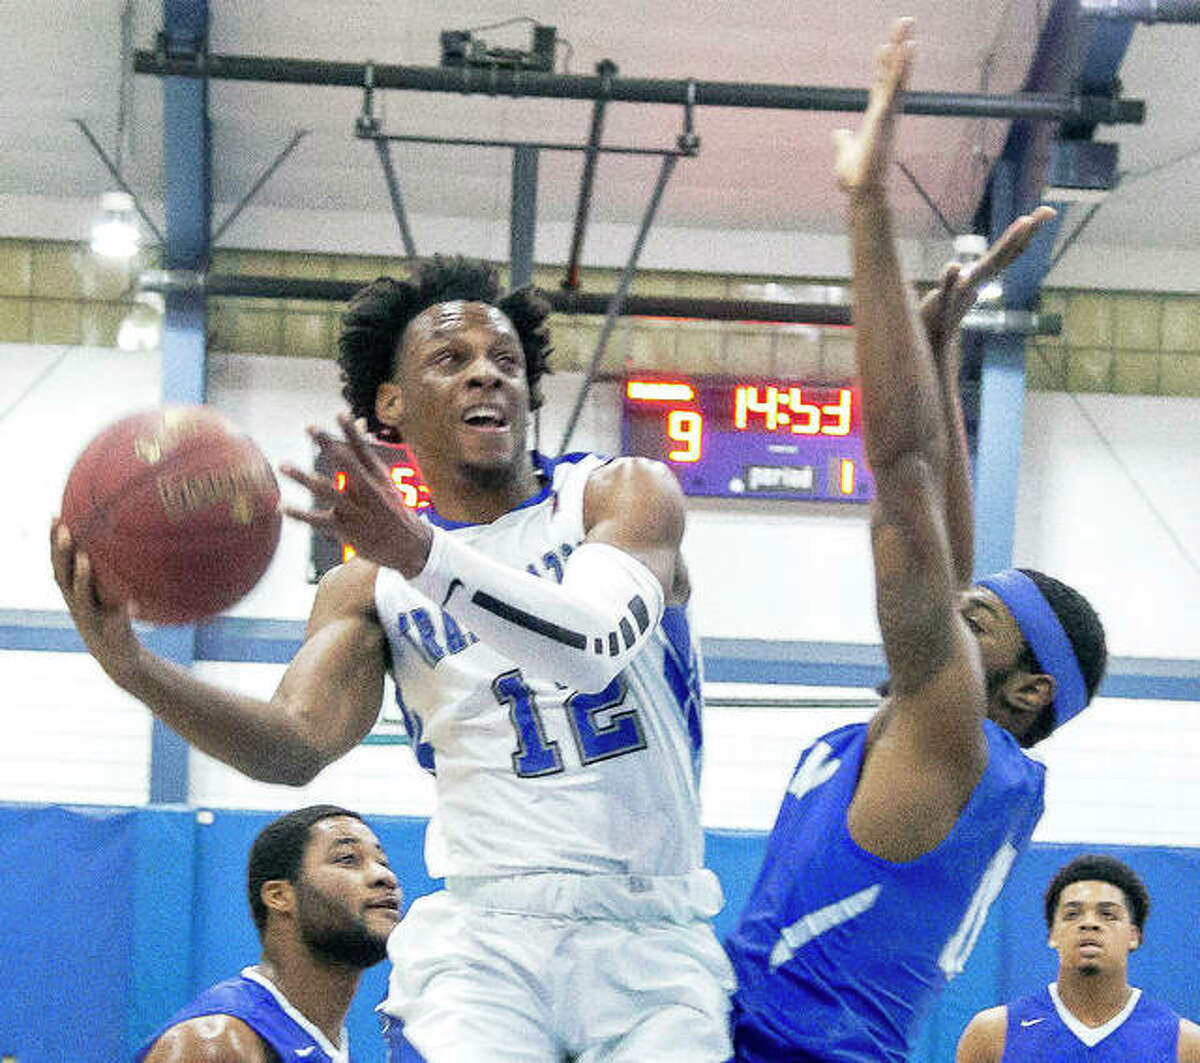 Jalen Morgan of LCCC (12) led the Trailblazers with 24 points and teammates Delaney Ortiz added 22 points, but LCCC lost a 96-83 decision to Shawnee College Monday night in a District 16 play-in game in Ullin.